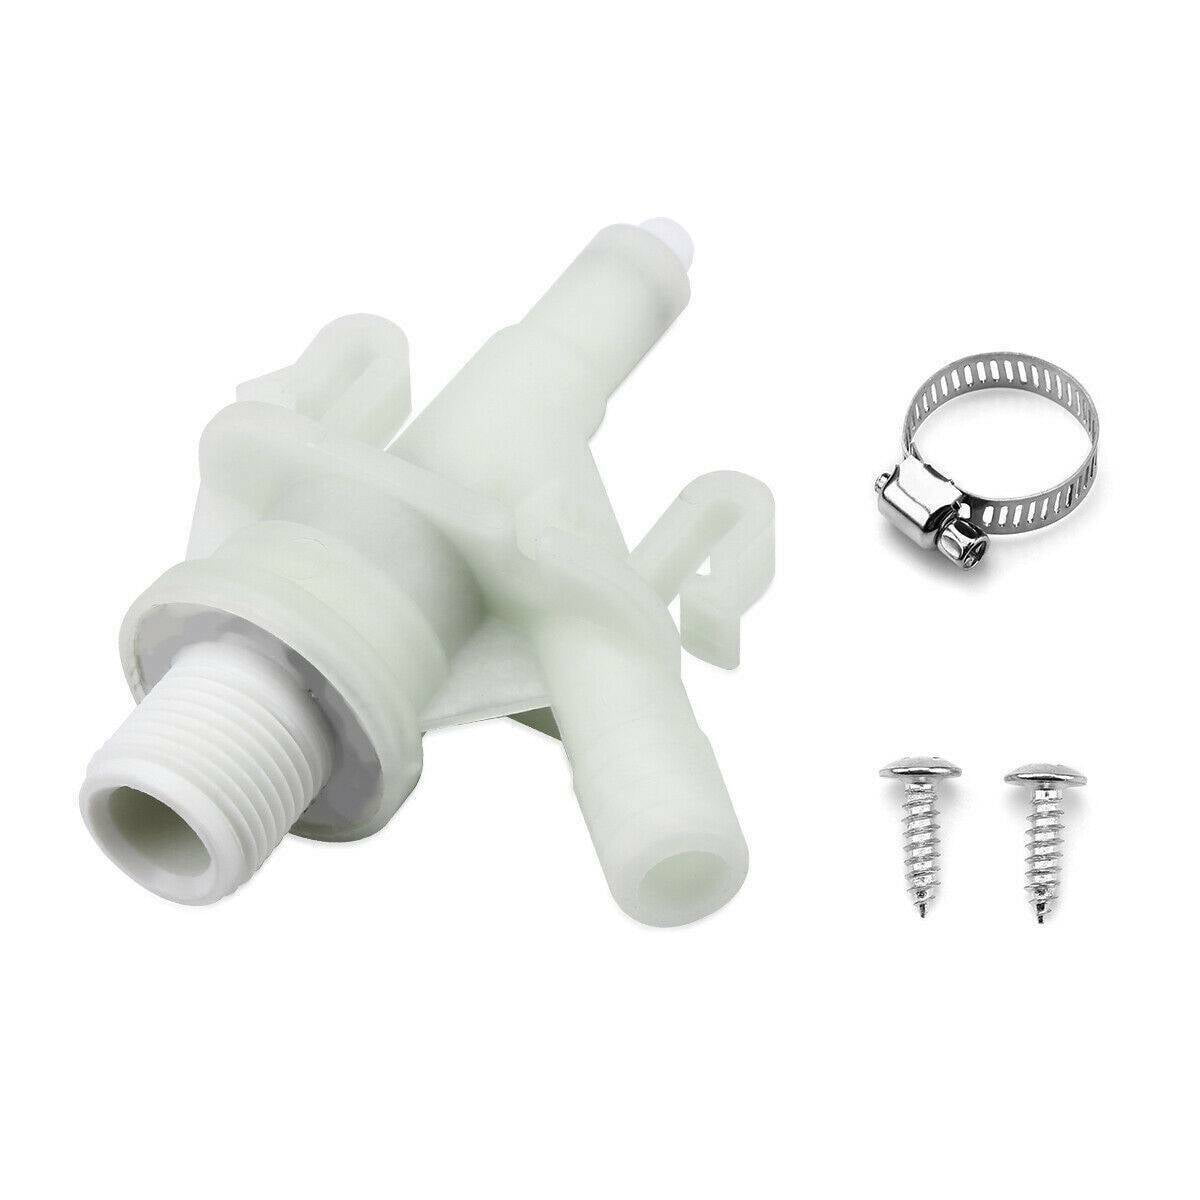  Halotronics RV Water Valve Replacement Kit for Pedal-Flush  Toilets - Compatible with Sealand Dometic 300, 301 310, 311, 320, 321 -  Hardware Included : Automotive